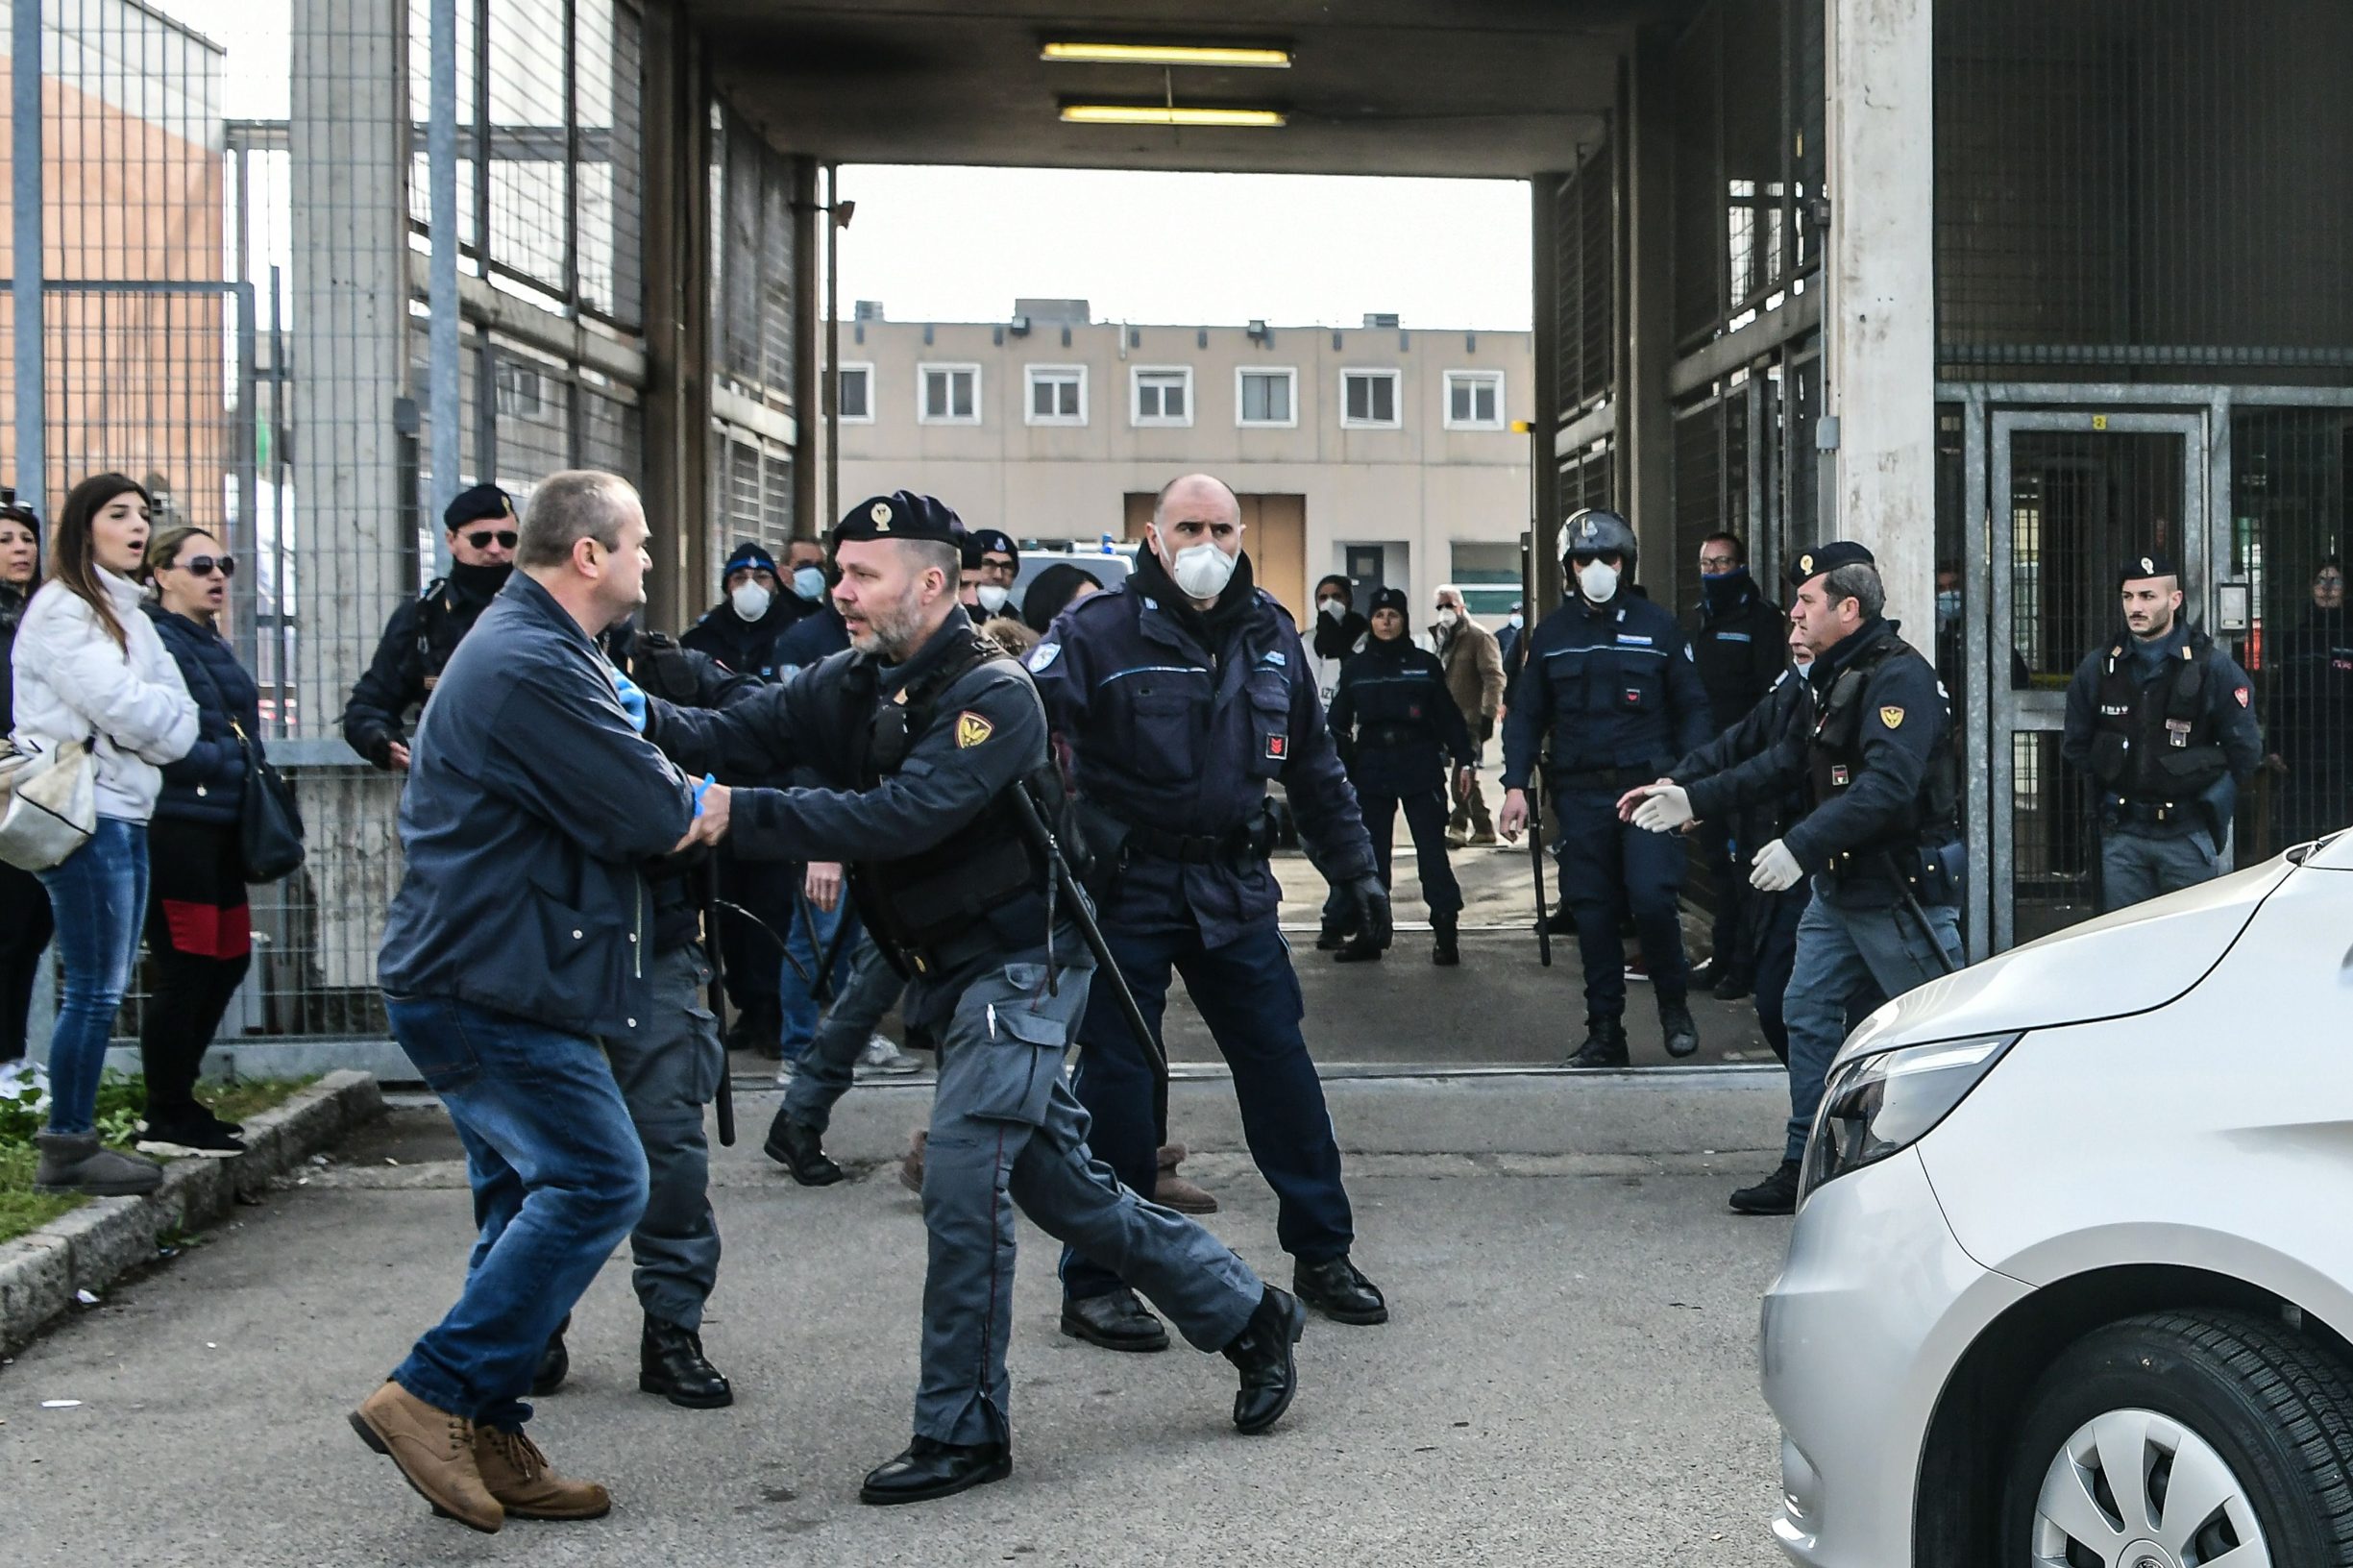 A Police officers holds off an inmate's relative (L) protesting outside the SantAnna prison in Modena, Emilia-Romagna, in one of Italy's quarantine red zones on March 9, 2020. - Inmates in four Italian prisons have revolted over new rules introduced to contain the coronavirus outbreak, leaving one prisoner dead and others injured, a prison rights group said on March 8. Prisoners at jails in Naples Poggioreale in the south, Modena in the north, Frosinone in central Italy and at Alexandria in the northwest had all revolted over measures including a ban on family visits, unions said. (Photo by Piero CRUCIATTI / AFP)